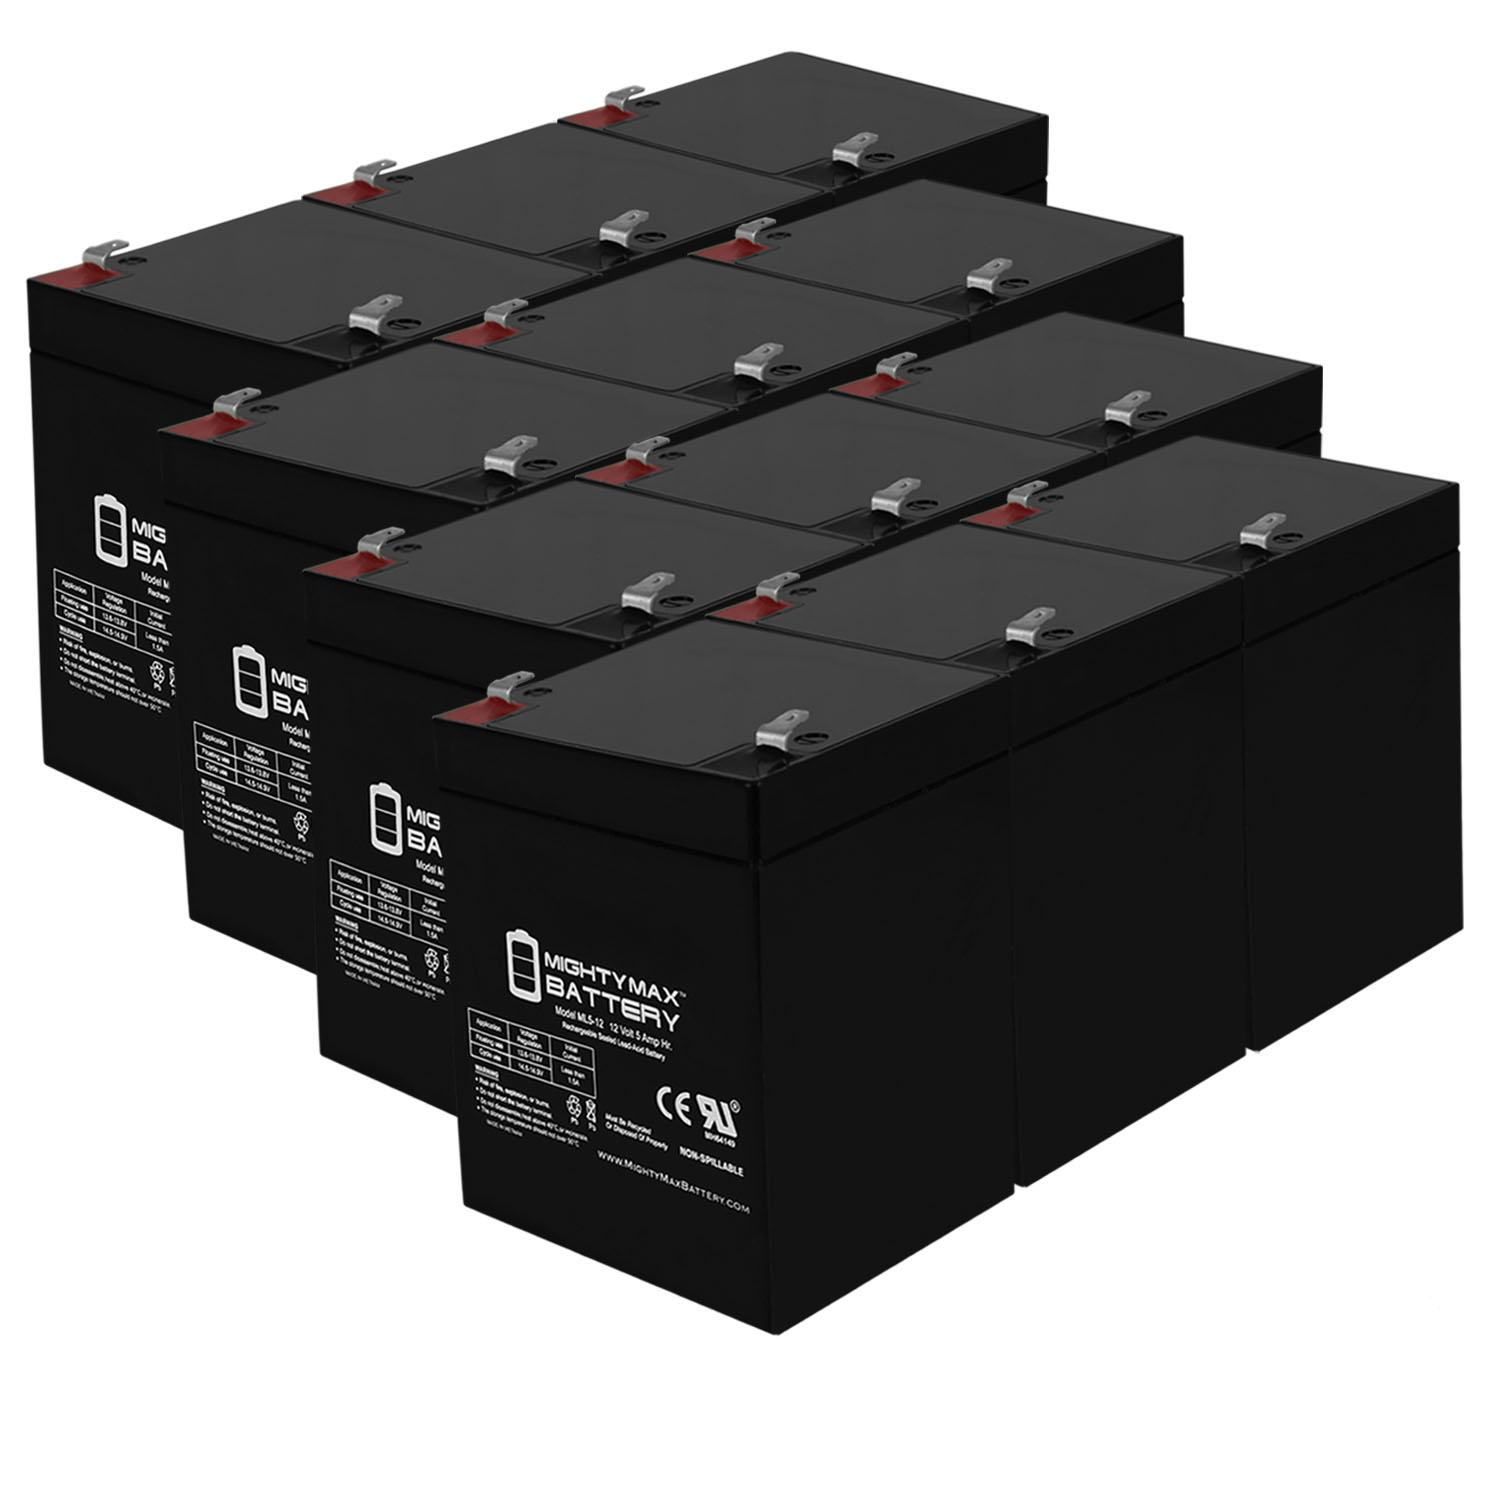 12V 5AH SLA Replacement Battery for Apex 1UD5742 - 12 Pack